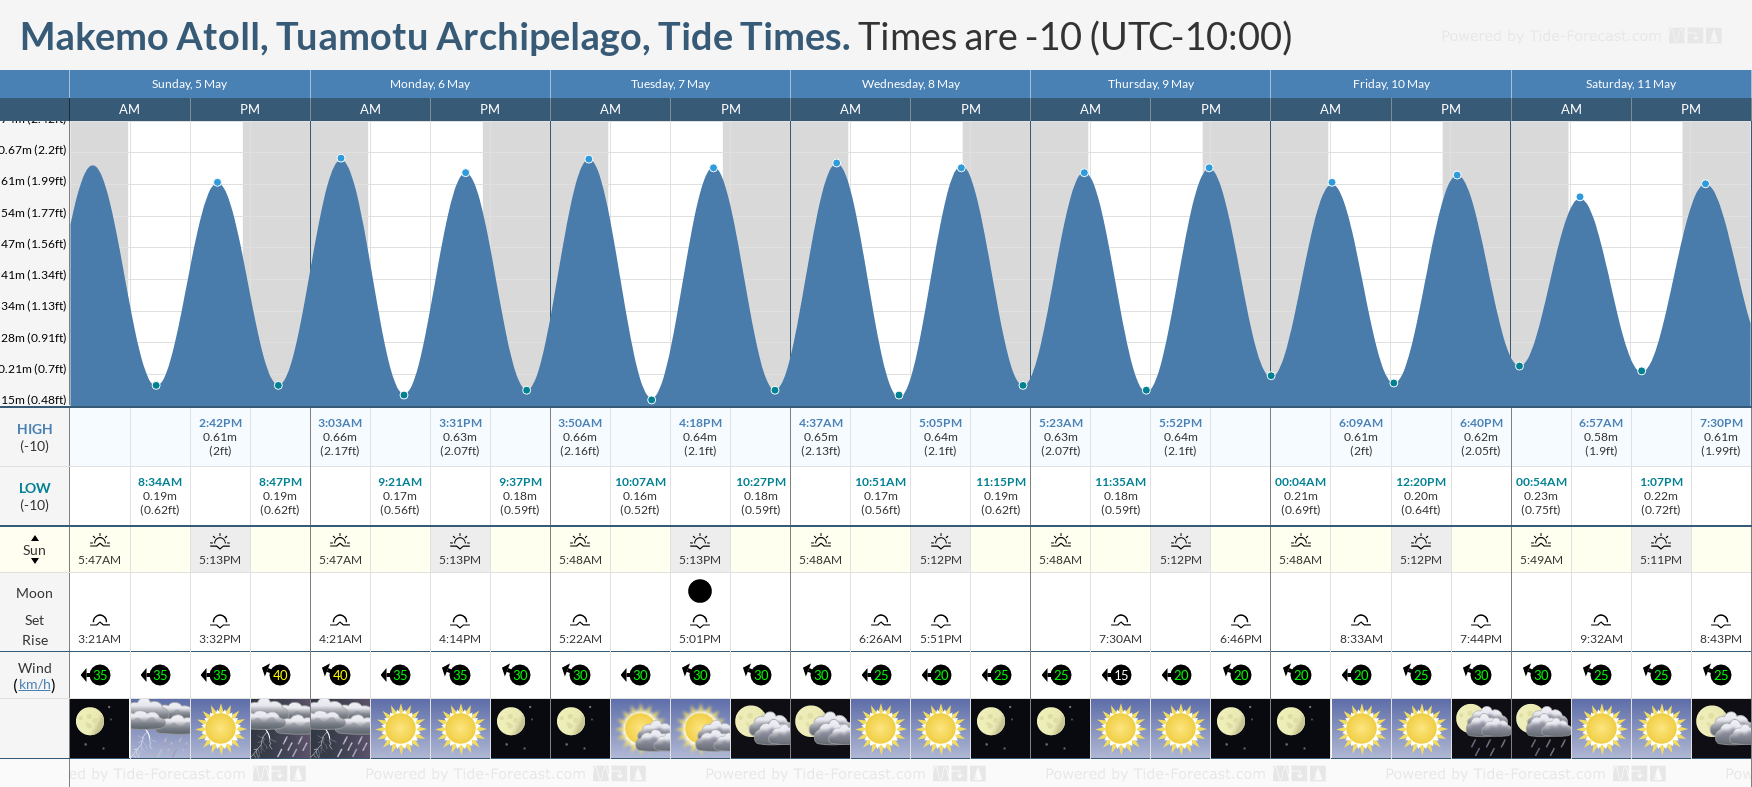 Makemo Atoll, Tuamotu Archipelago Tide Chart including high and low tide tide times for the next 7 days